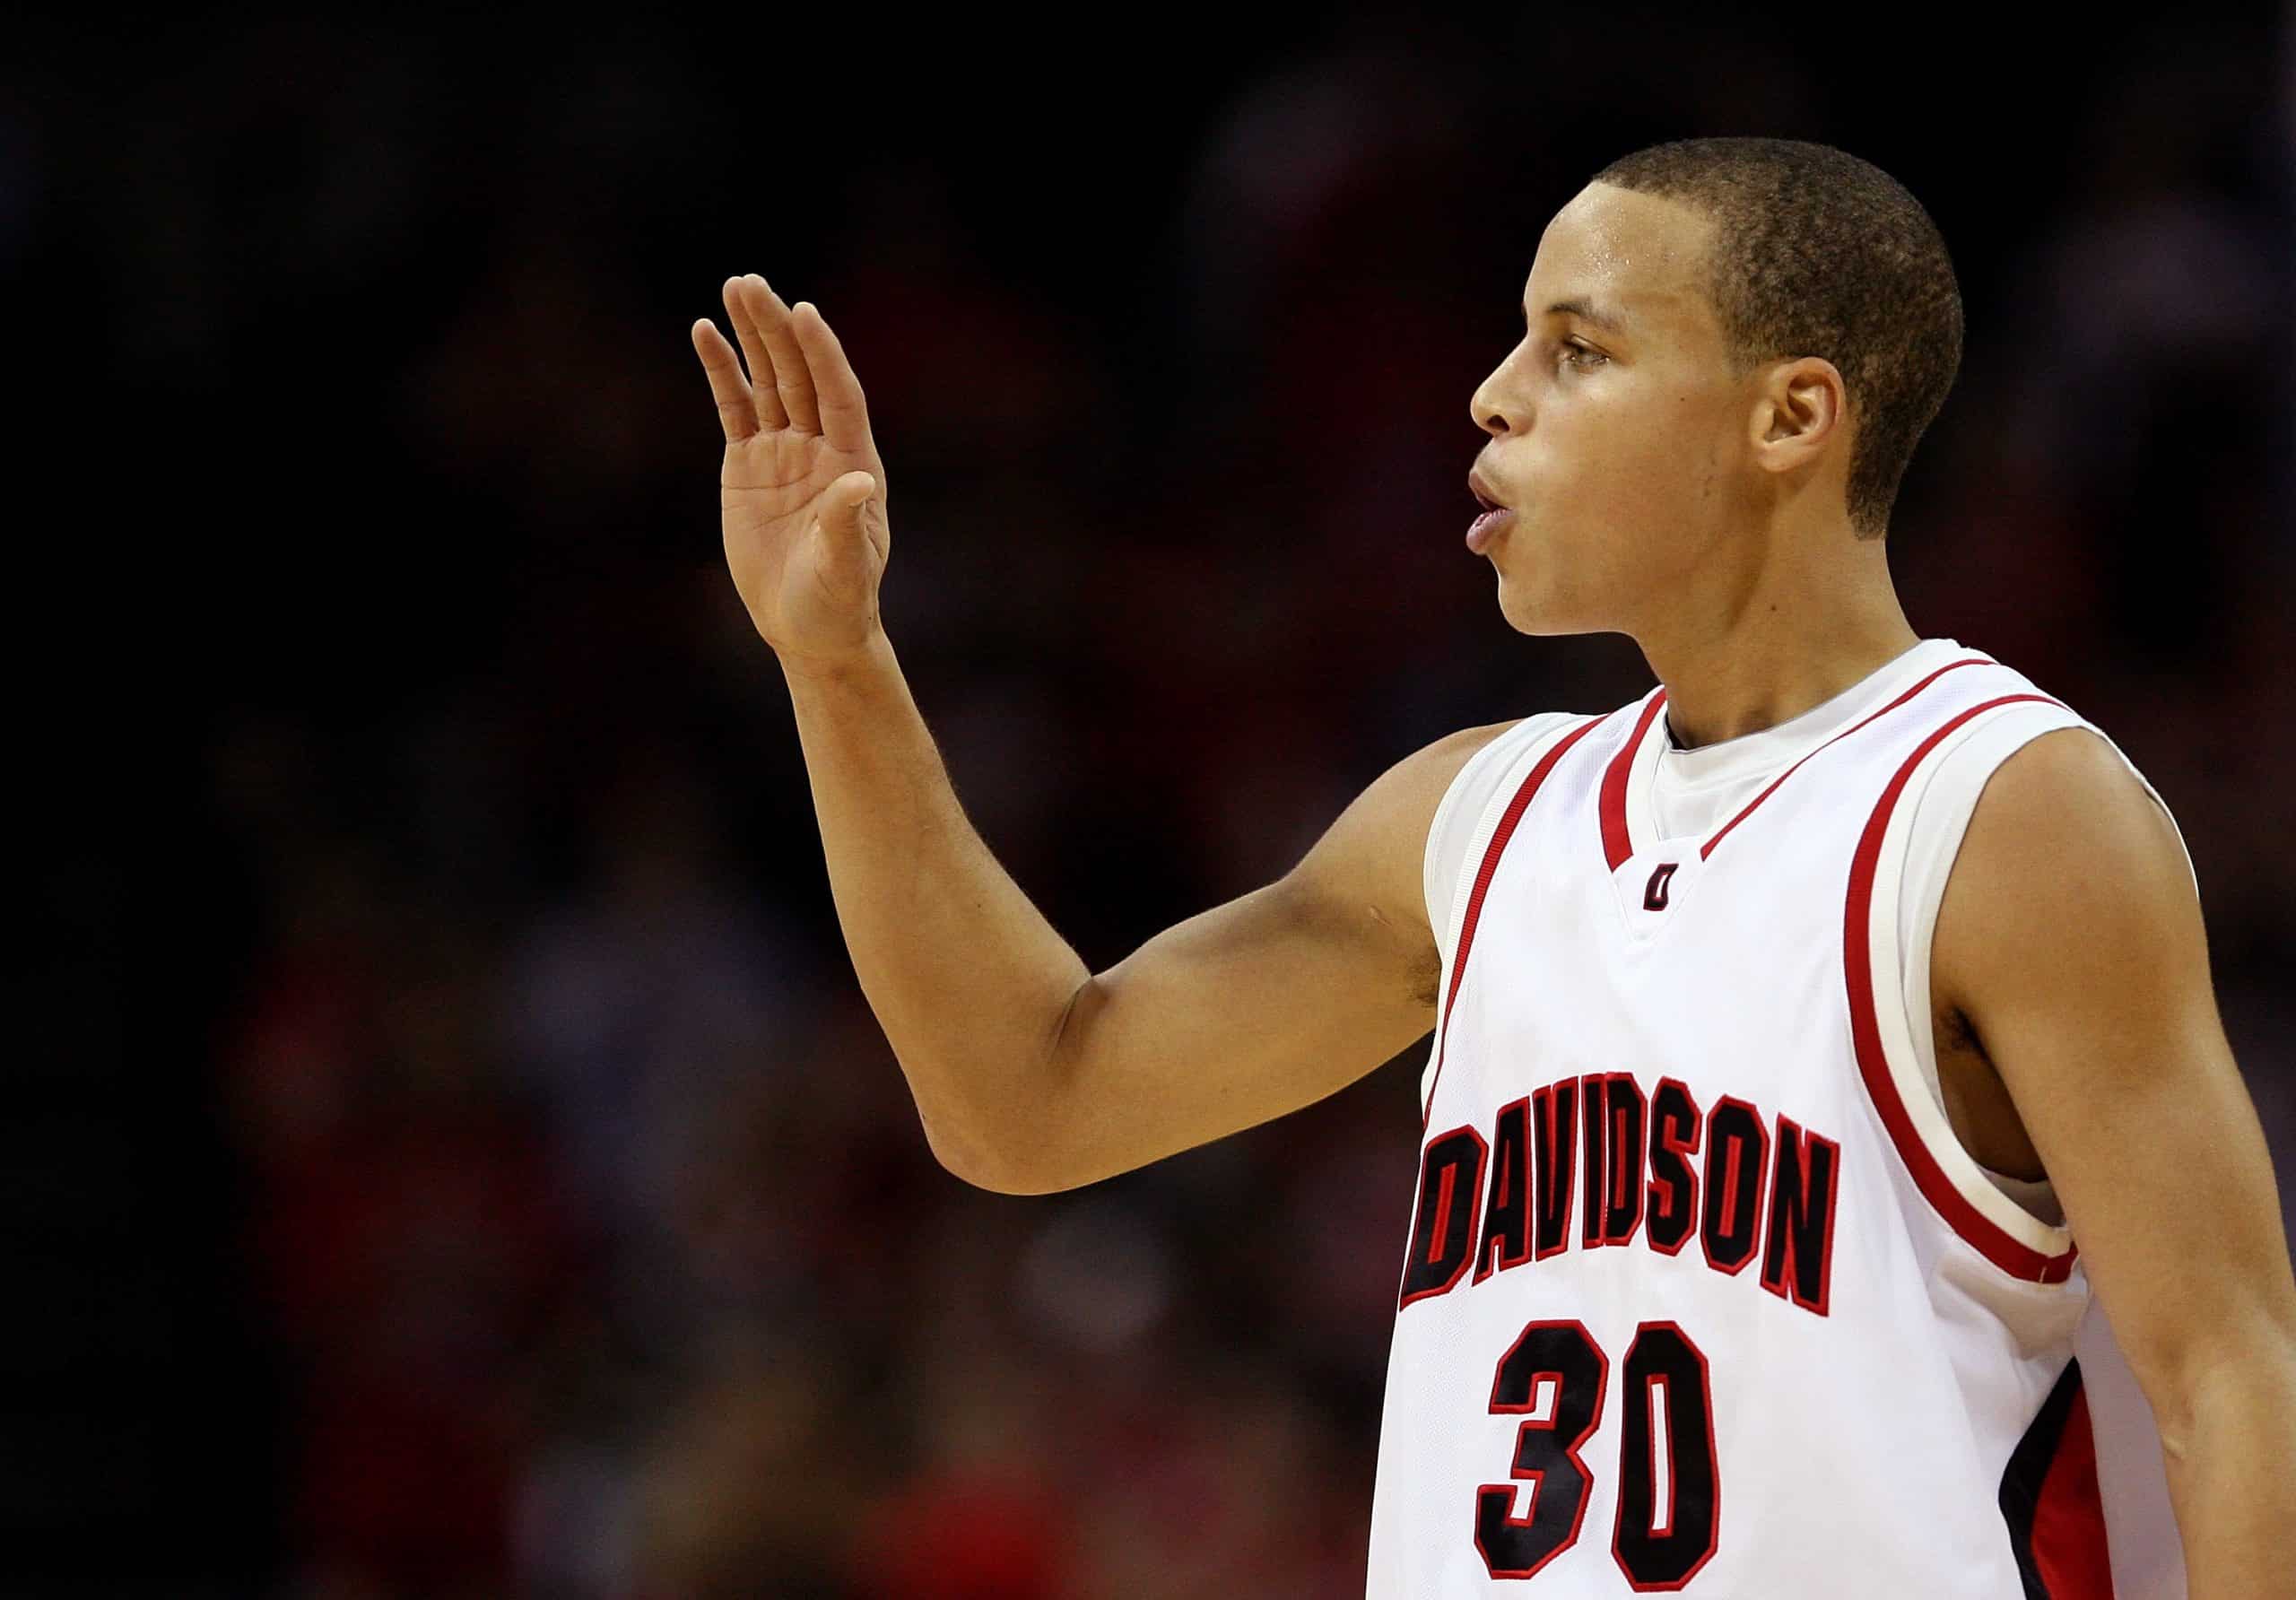 Stephen Curry of the Davidson Wildcats reacts to his team's 72-67 victory over the North Carolina State Wolfpack.